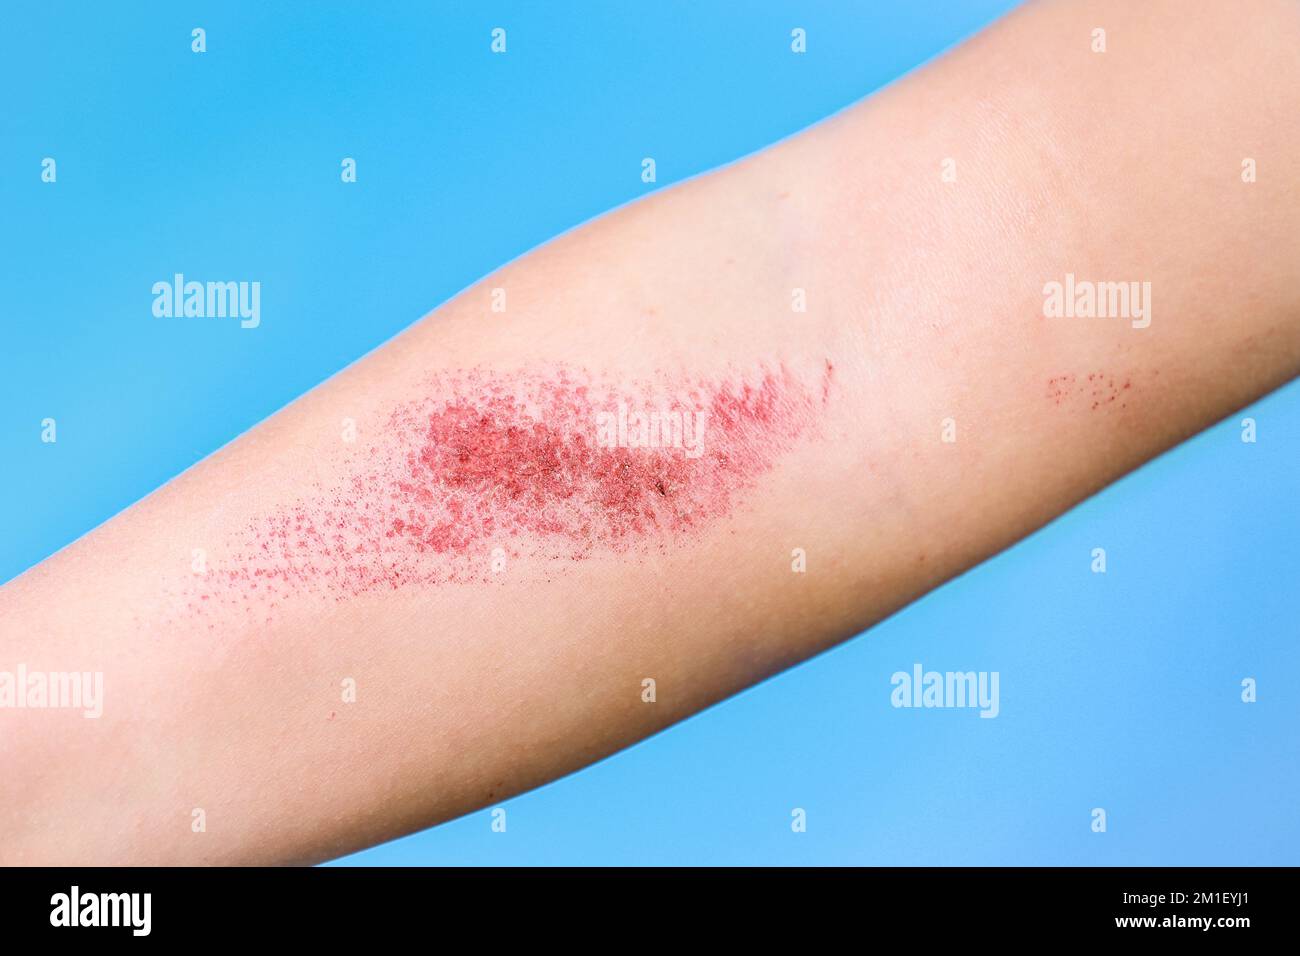 Children's hand burn. Children's hand with a burnt wound on a blu background.Close up Stock Photo